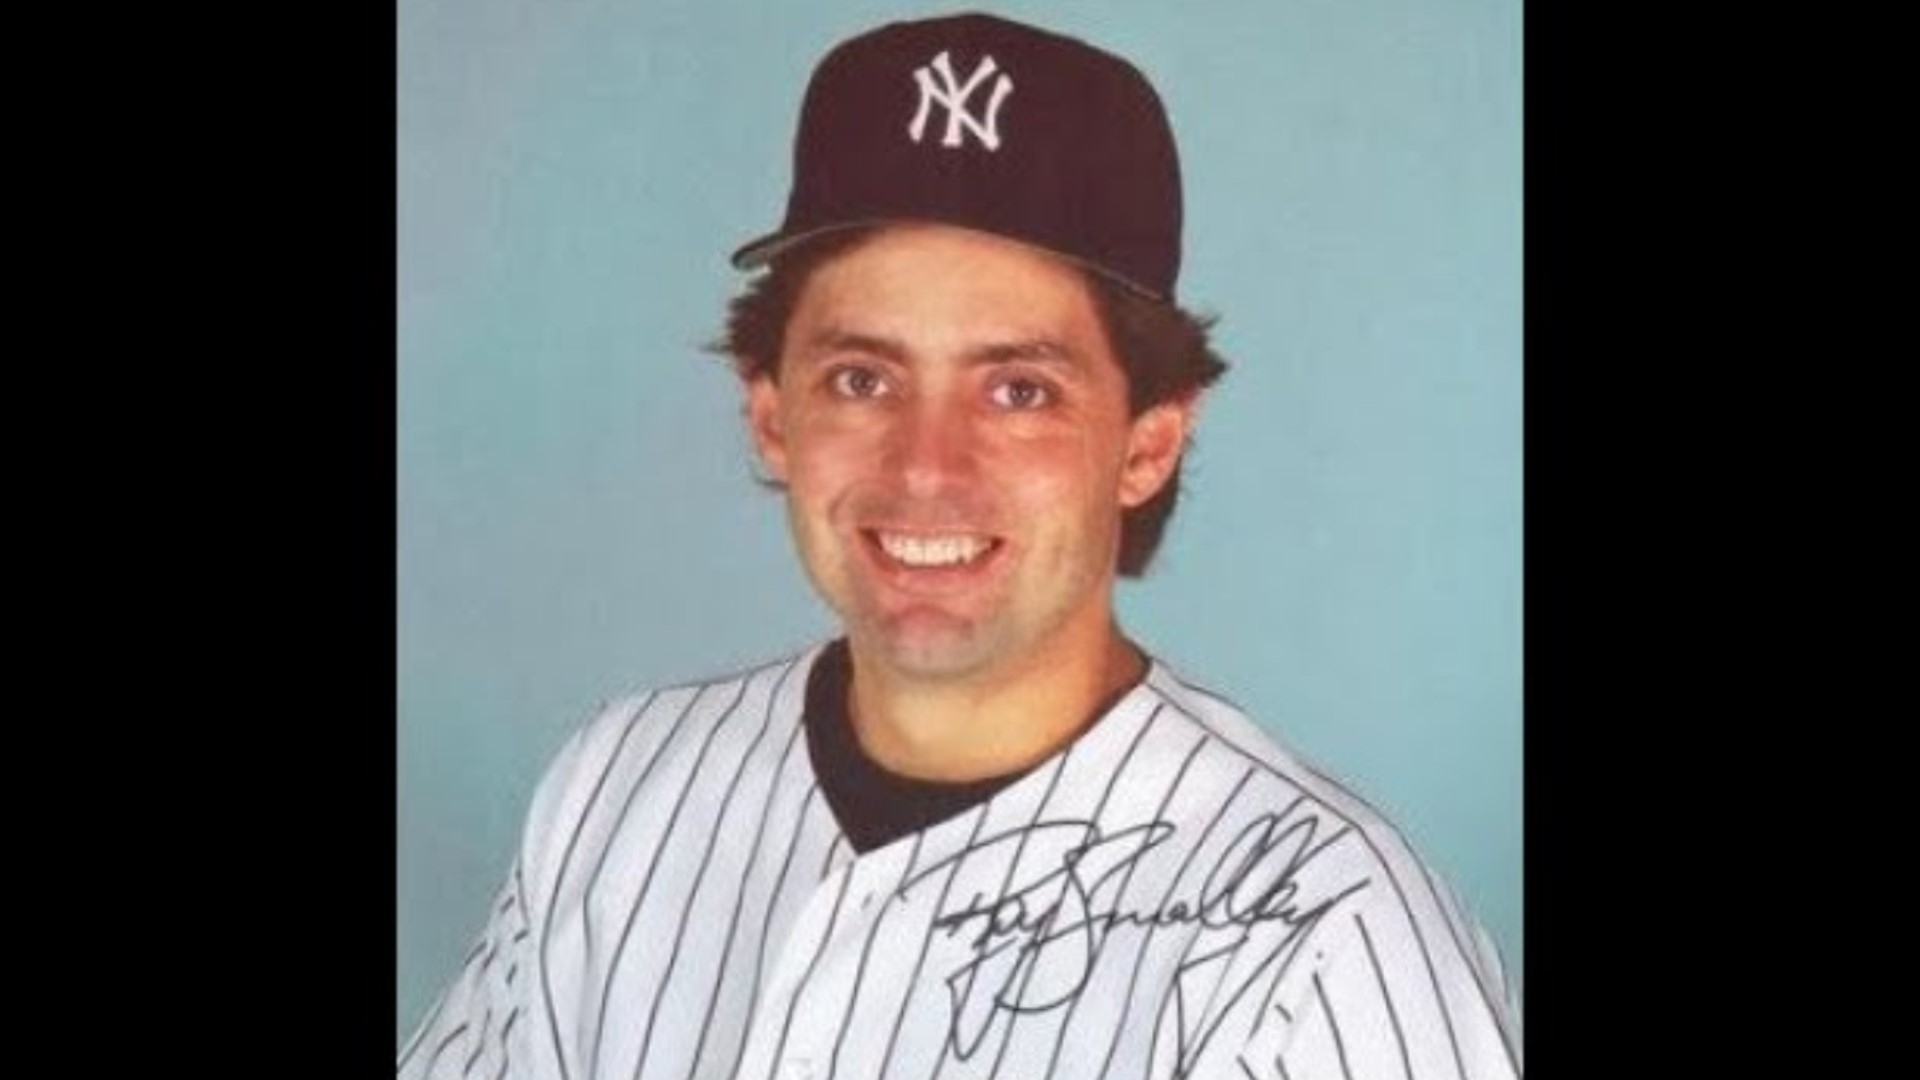 Stacey looks back at some Yankees games from the 80s that were played on the days the Friday the 13th movies were released.